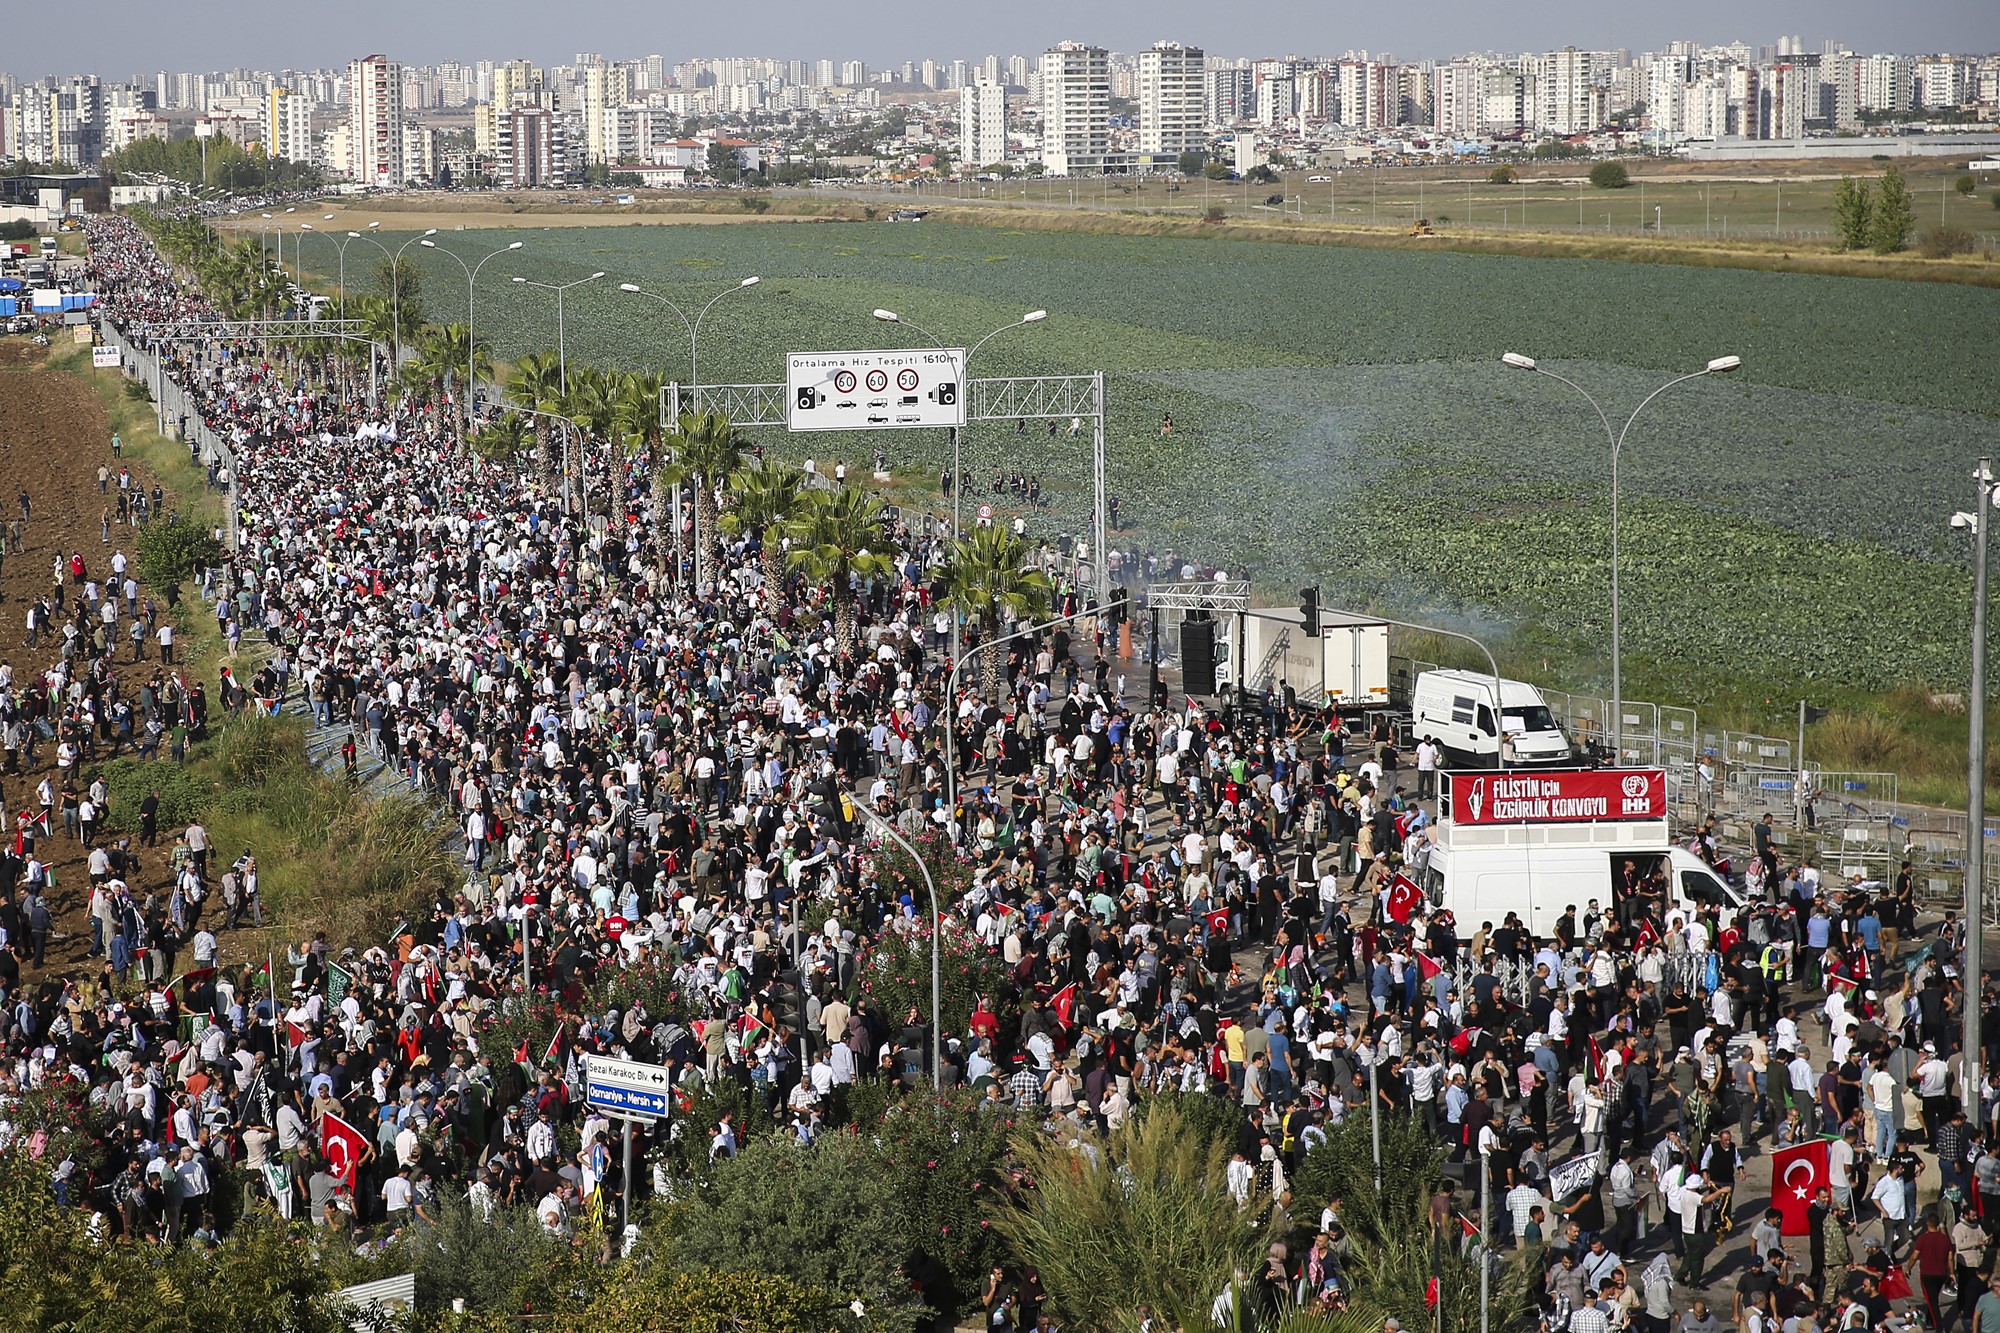 A picture taken from high up shows thousands of protesters gathered on a road, a large city and a field can be seen in the background